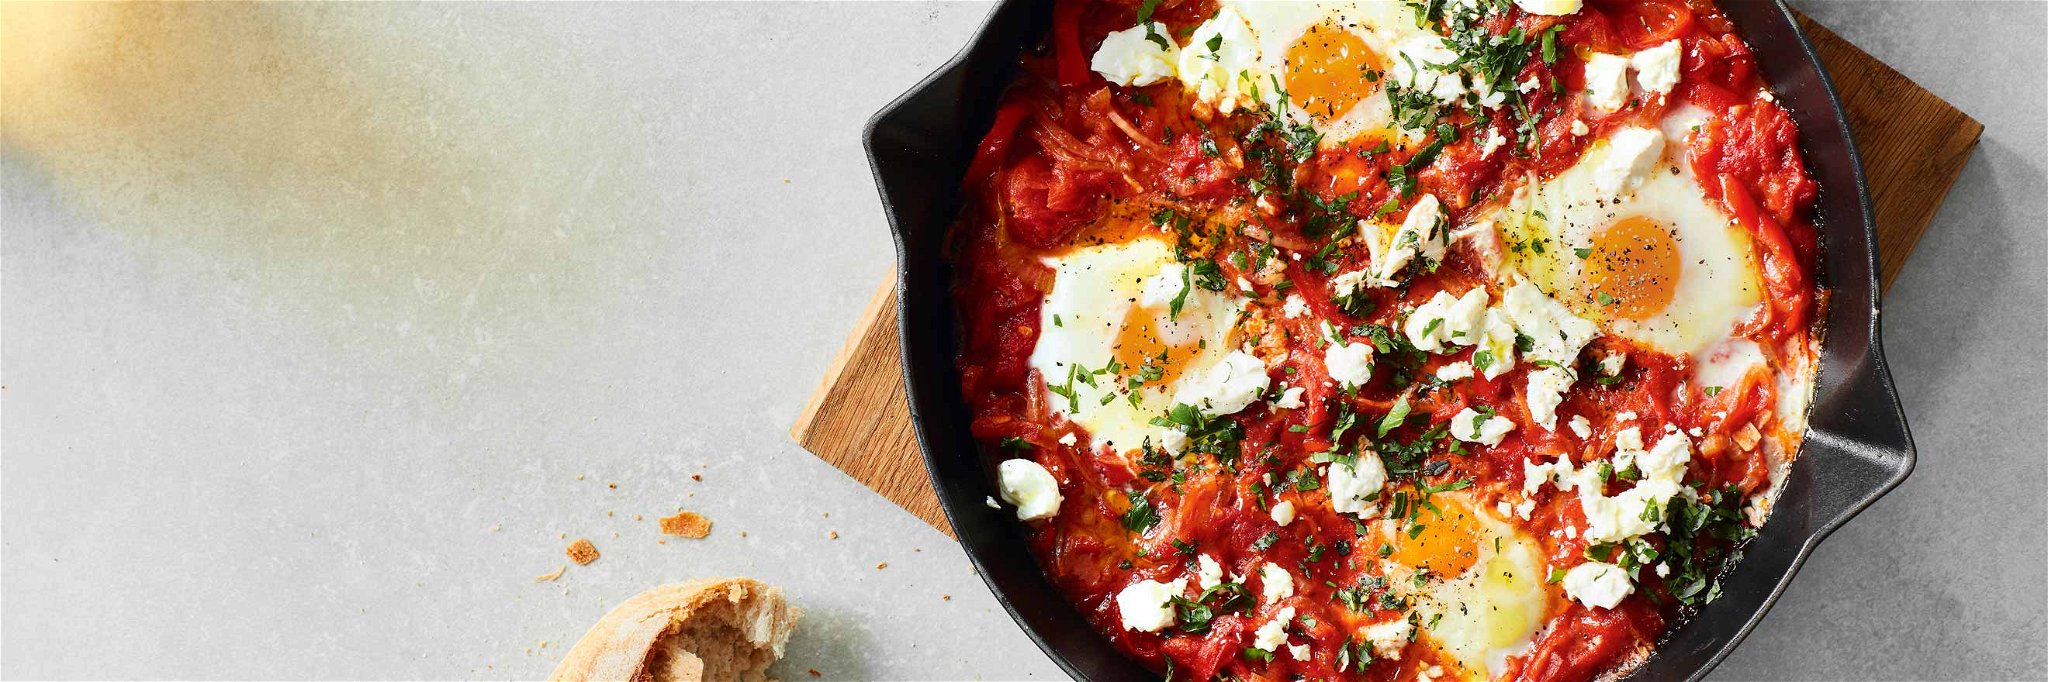 Poached Eggs in Spicy Tomato Sauce